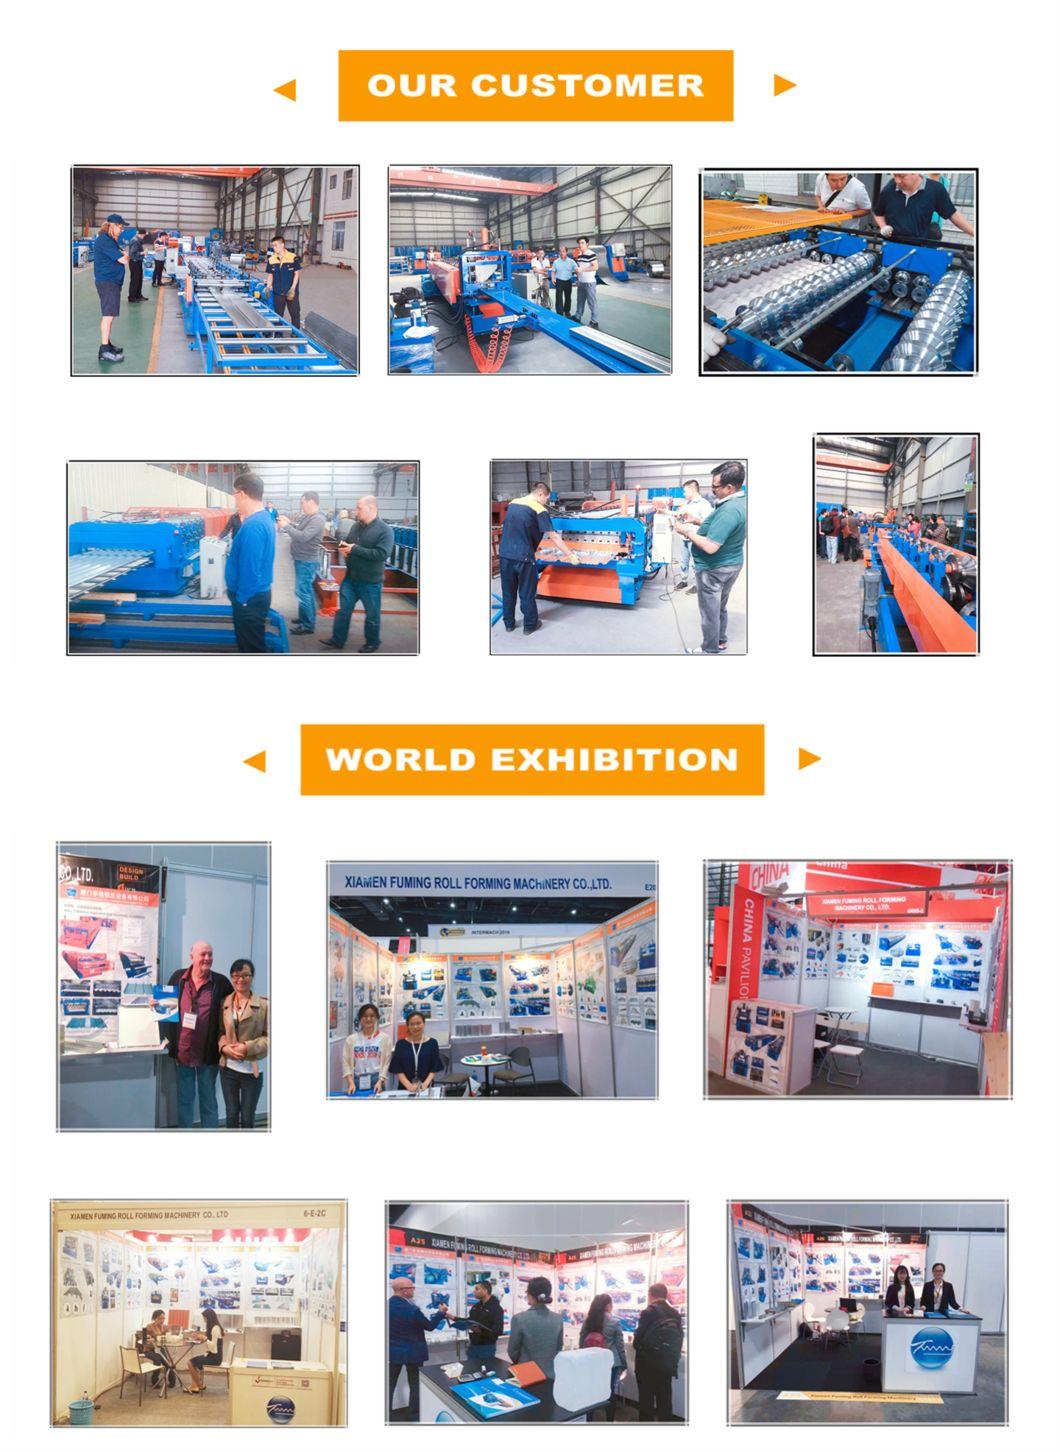 Gi, PPGI, Colored Steel Roller Forming Tile Making Machine with CE